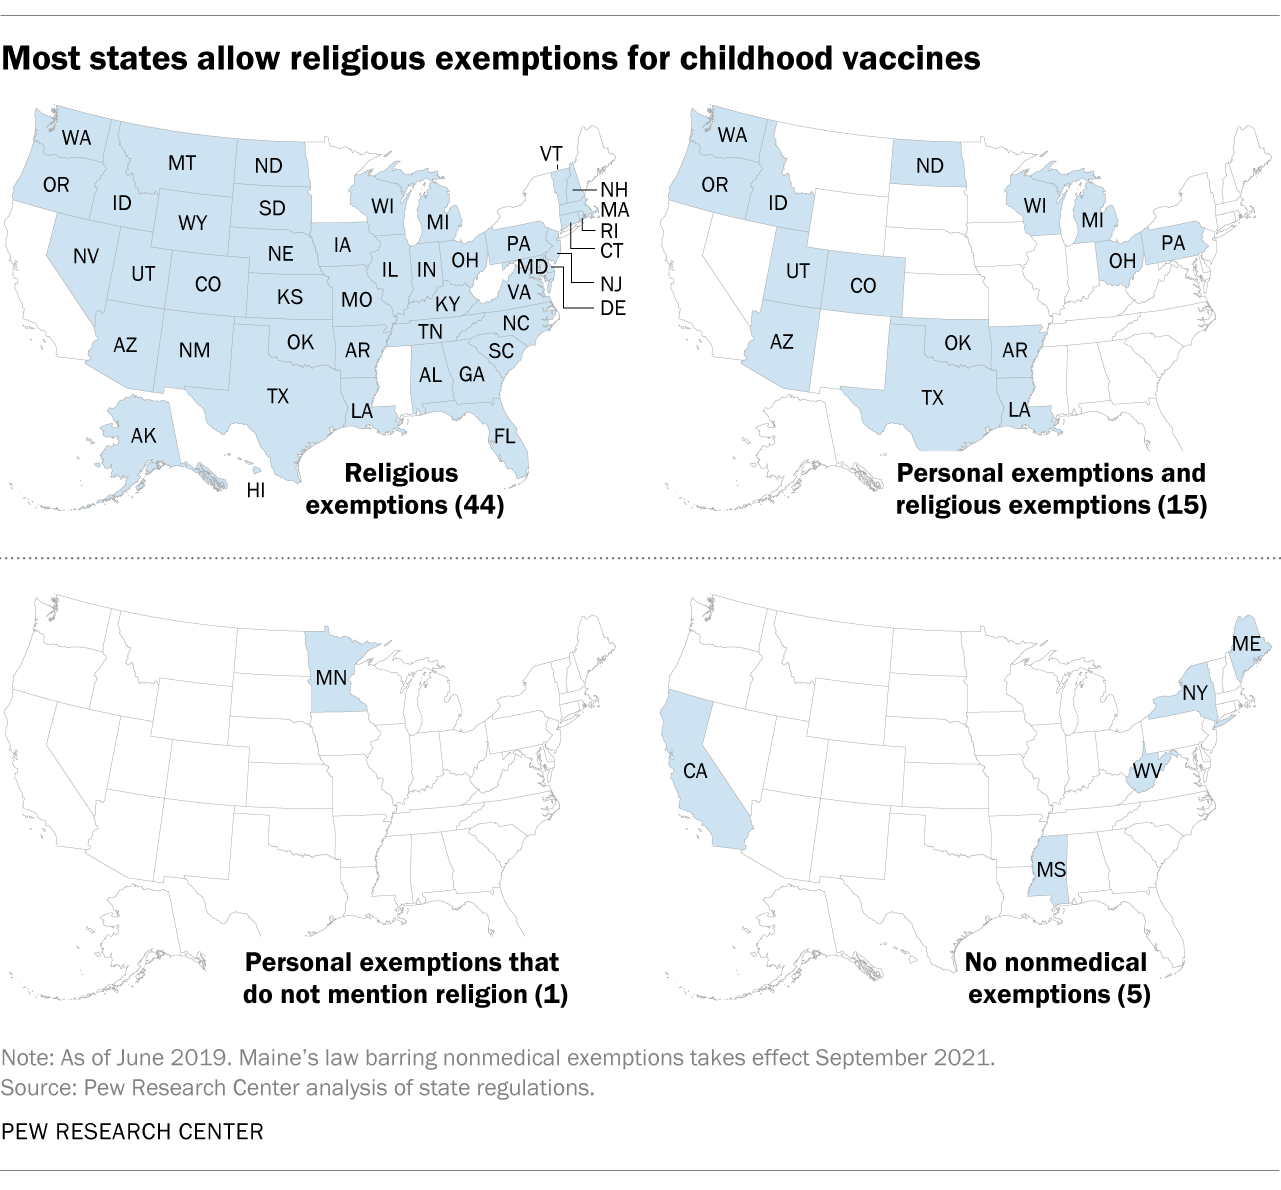 Most states allow religious exemptions for childhood vaccines